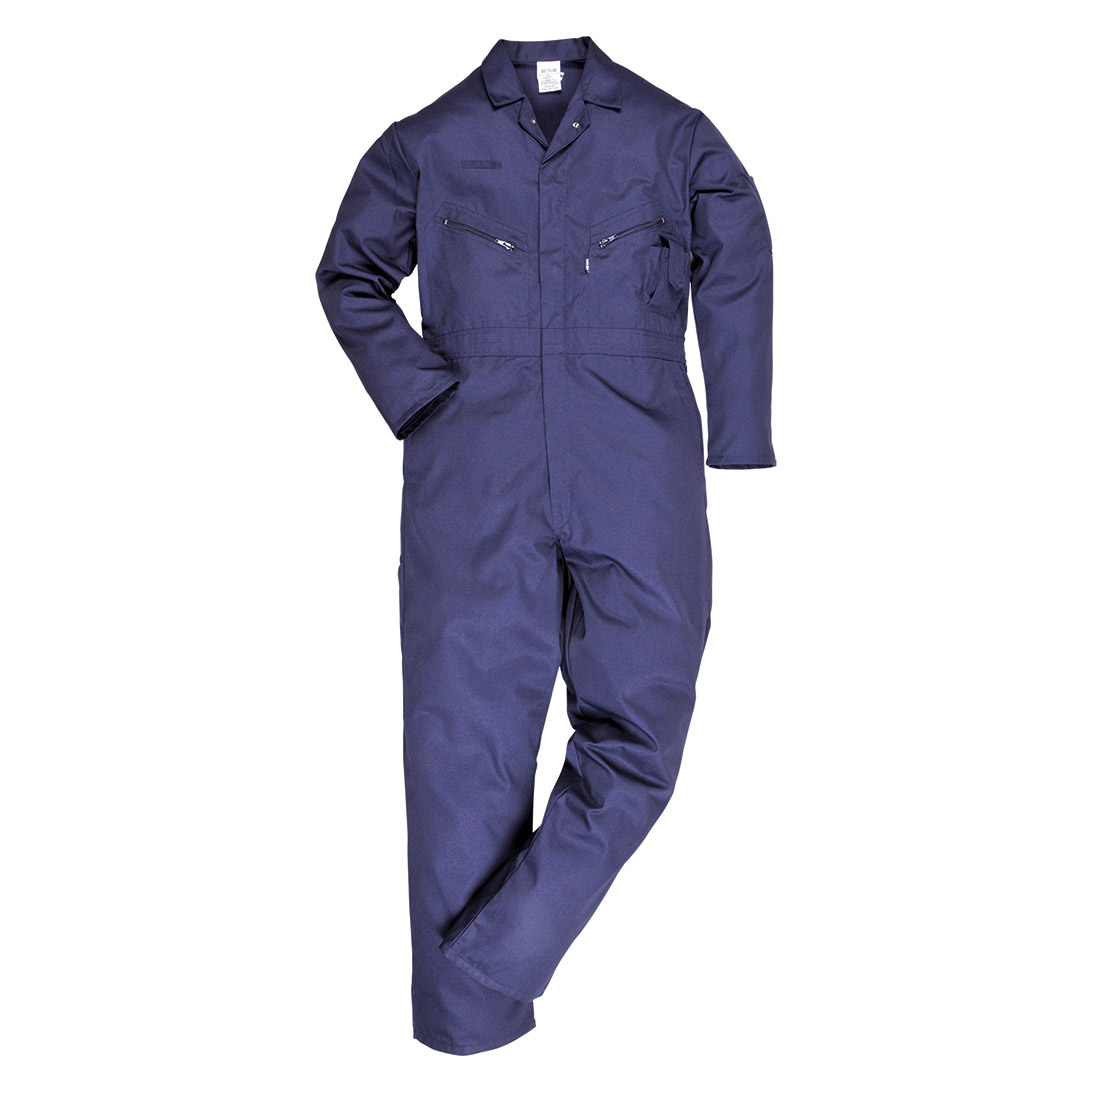 100% Cotton Breathable Moisture Wicking Work Coverall with 50+ UPF